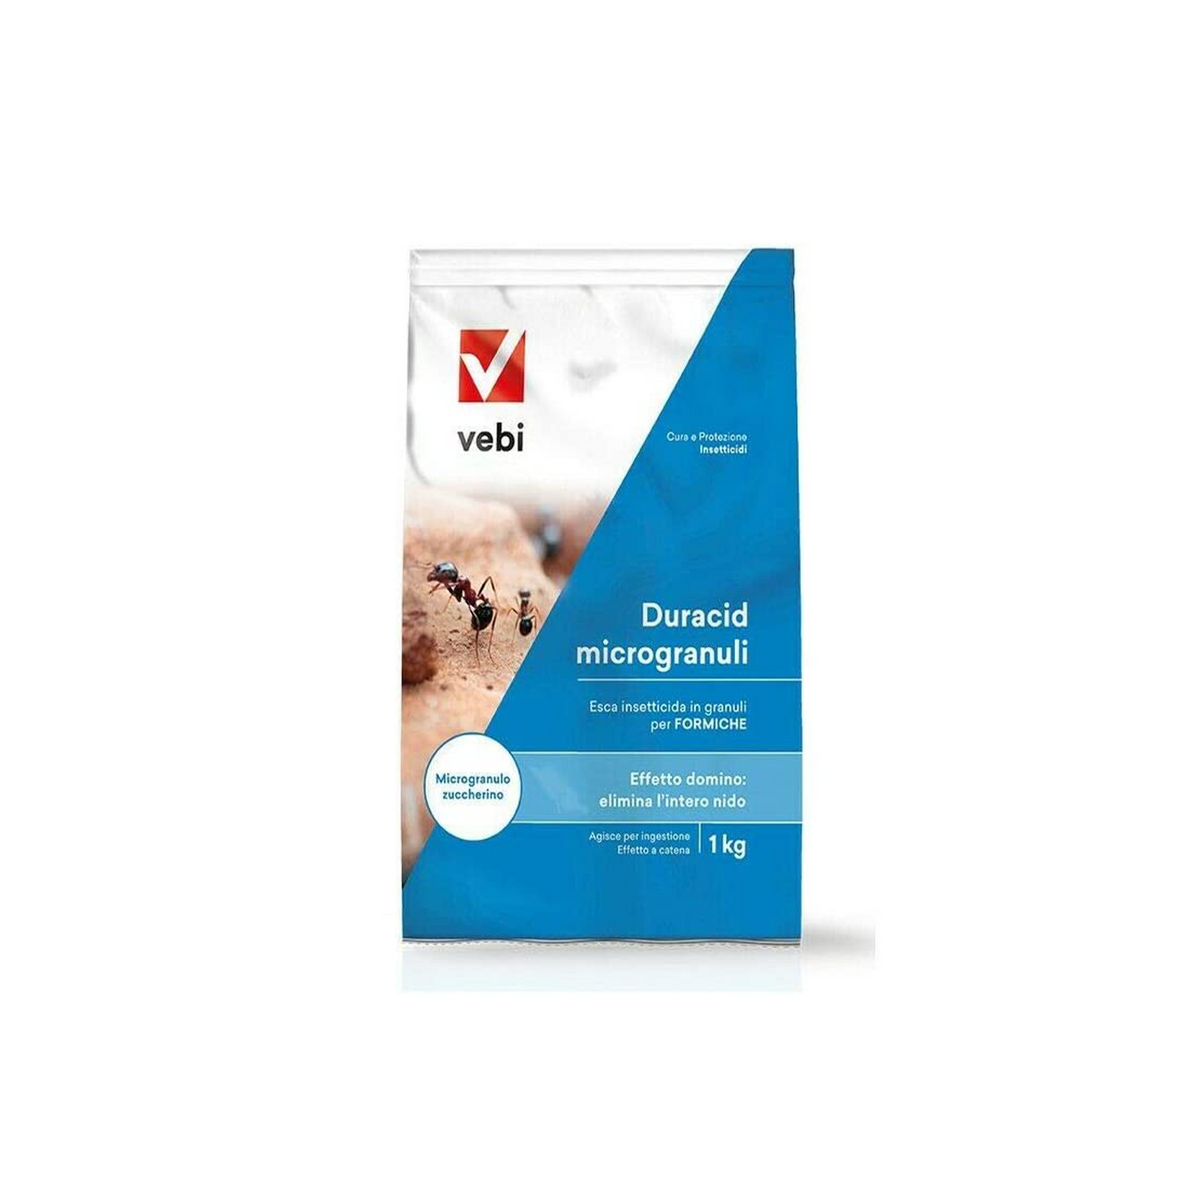 Vebi microgranules insecticide bait for ants 1KG - DURACID 